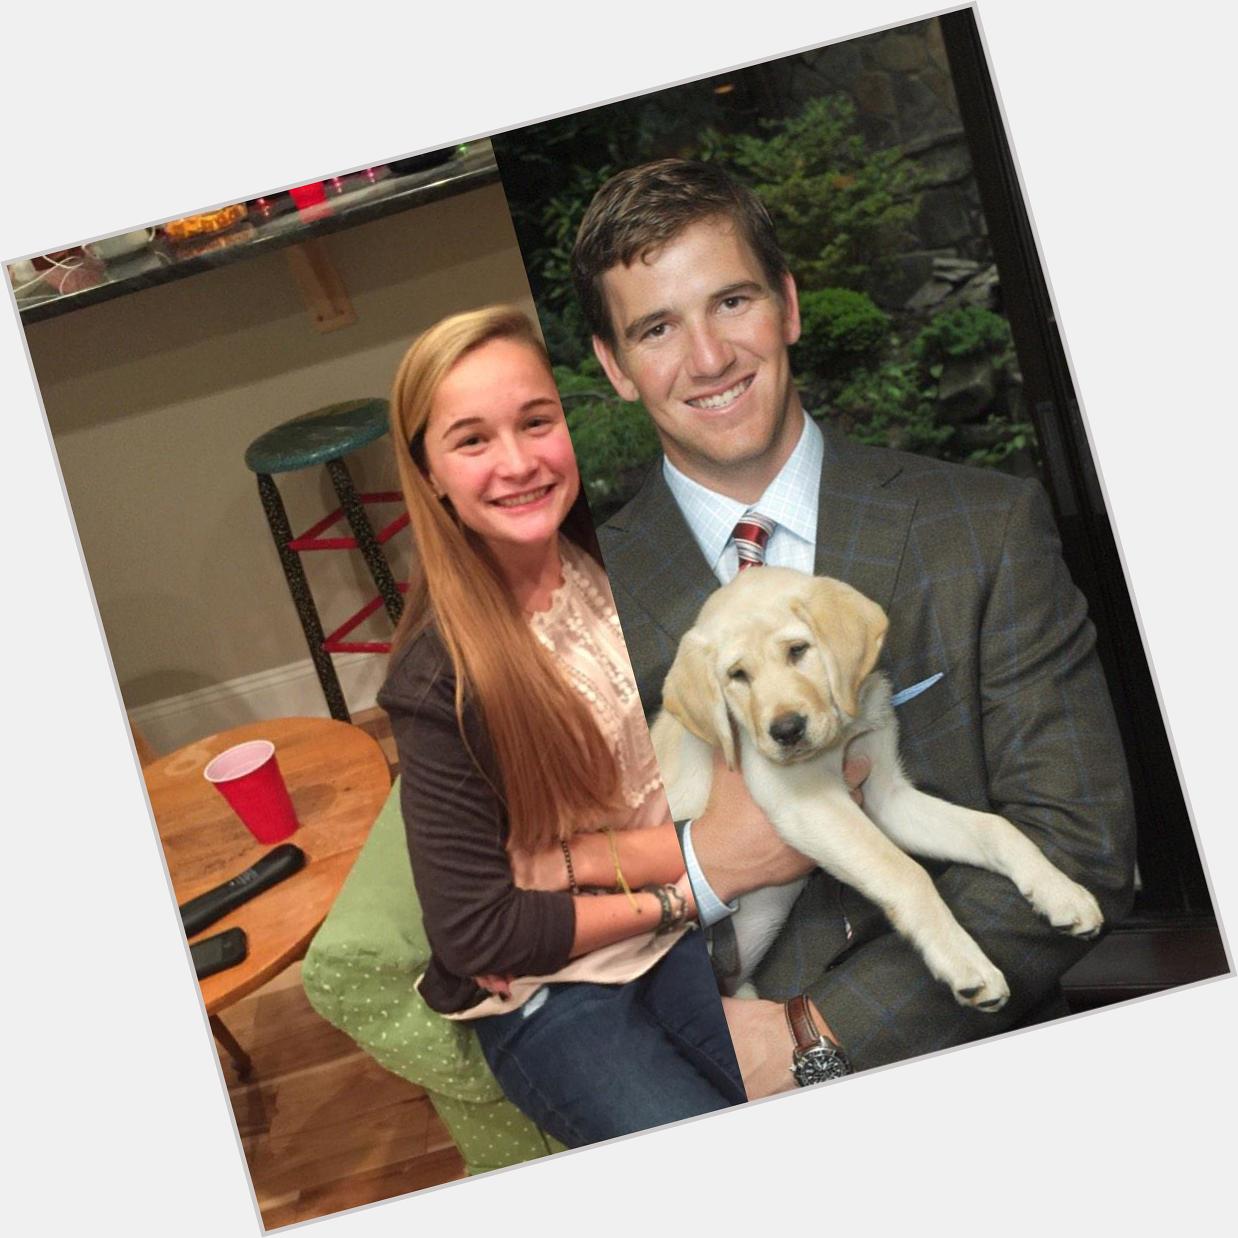 Happy Birthday to my twin, Eli Manning, thanks for the puppy   